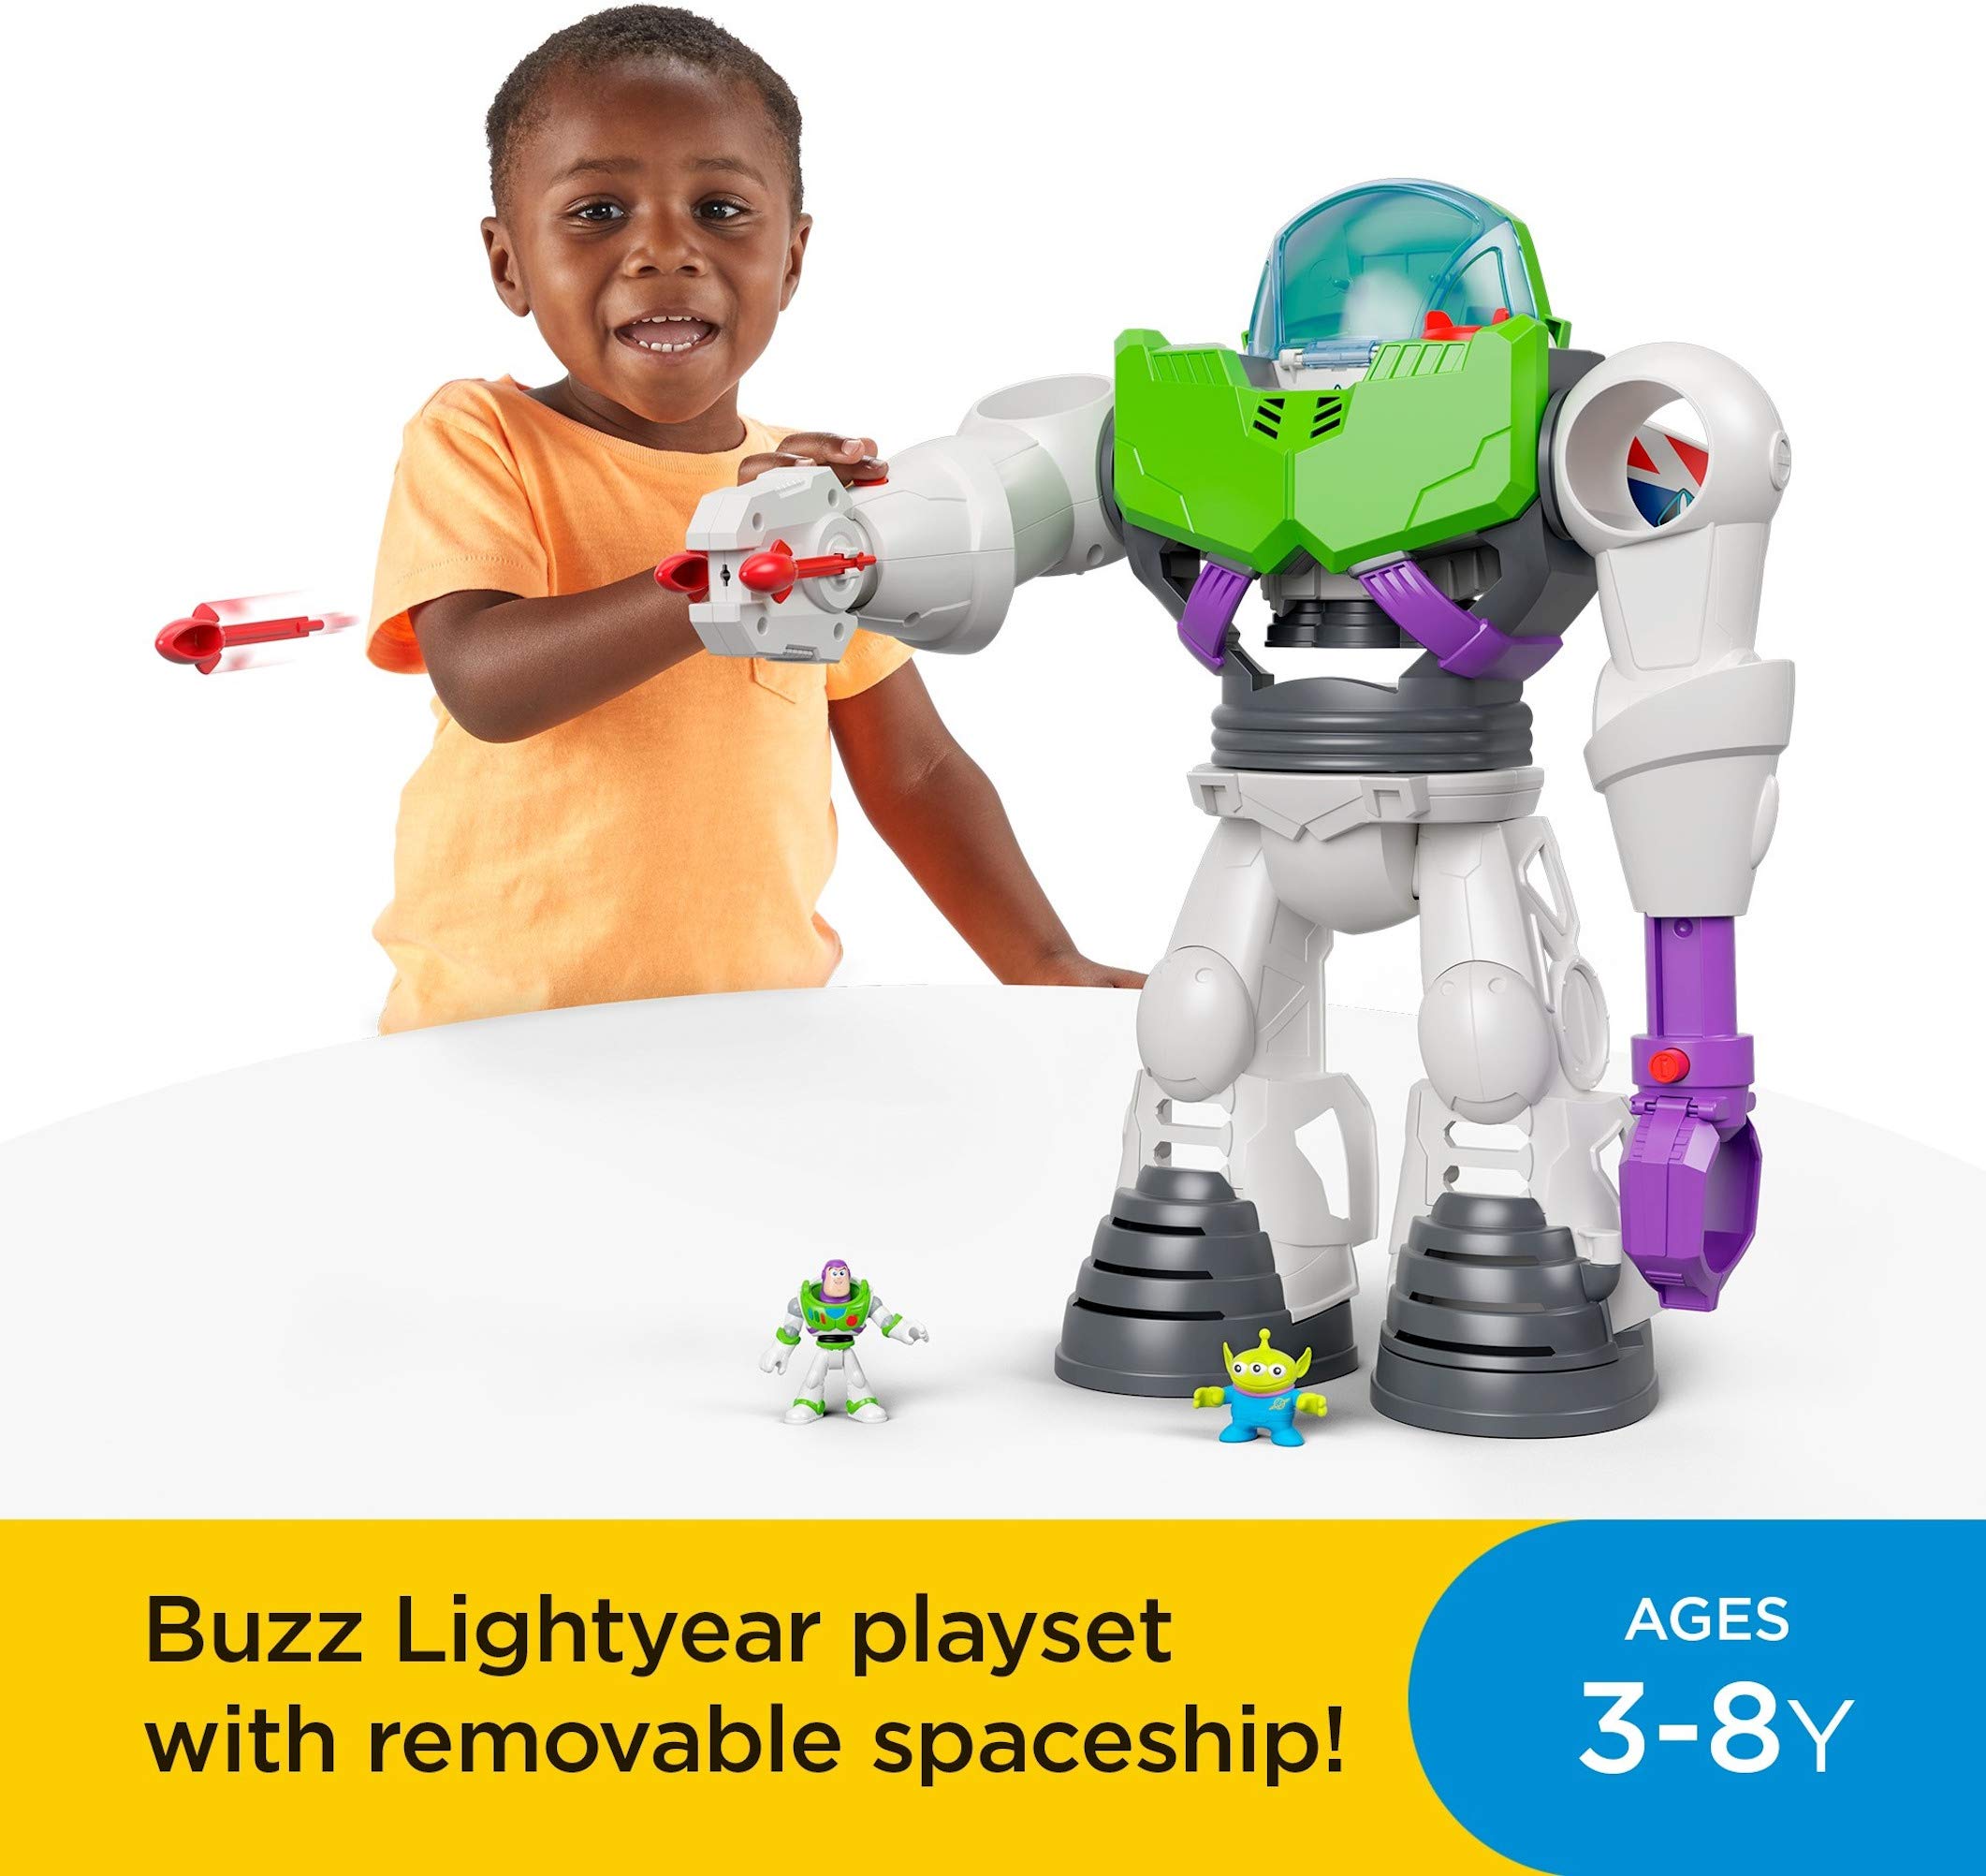 Disney Pixar Toy Story Playset Imaginext Buzz Lightyear Robot with Removable Spaceship & Figures for Pretend Play Ages 3+ Years